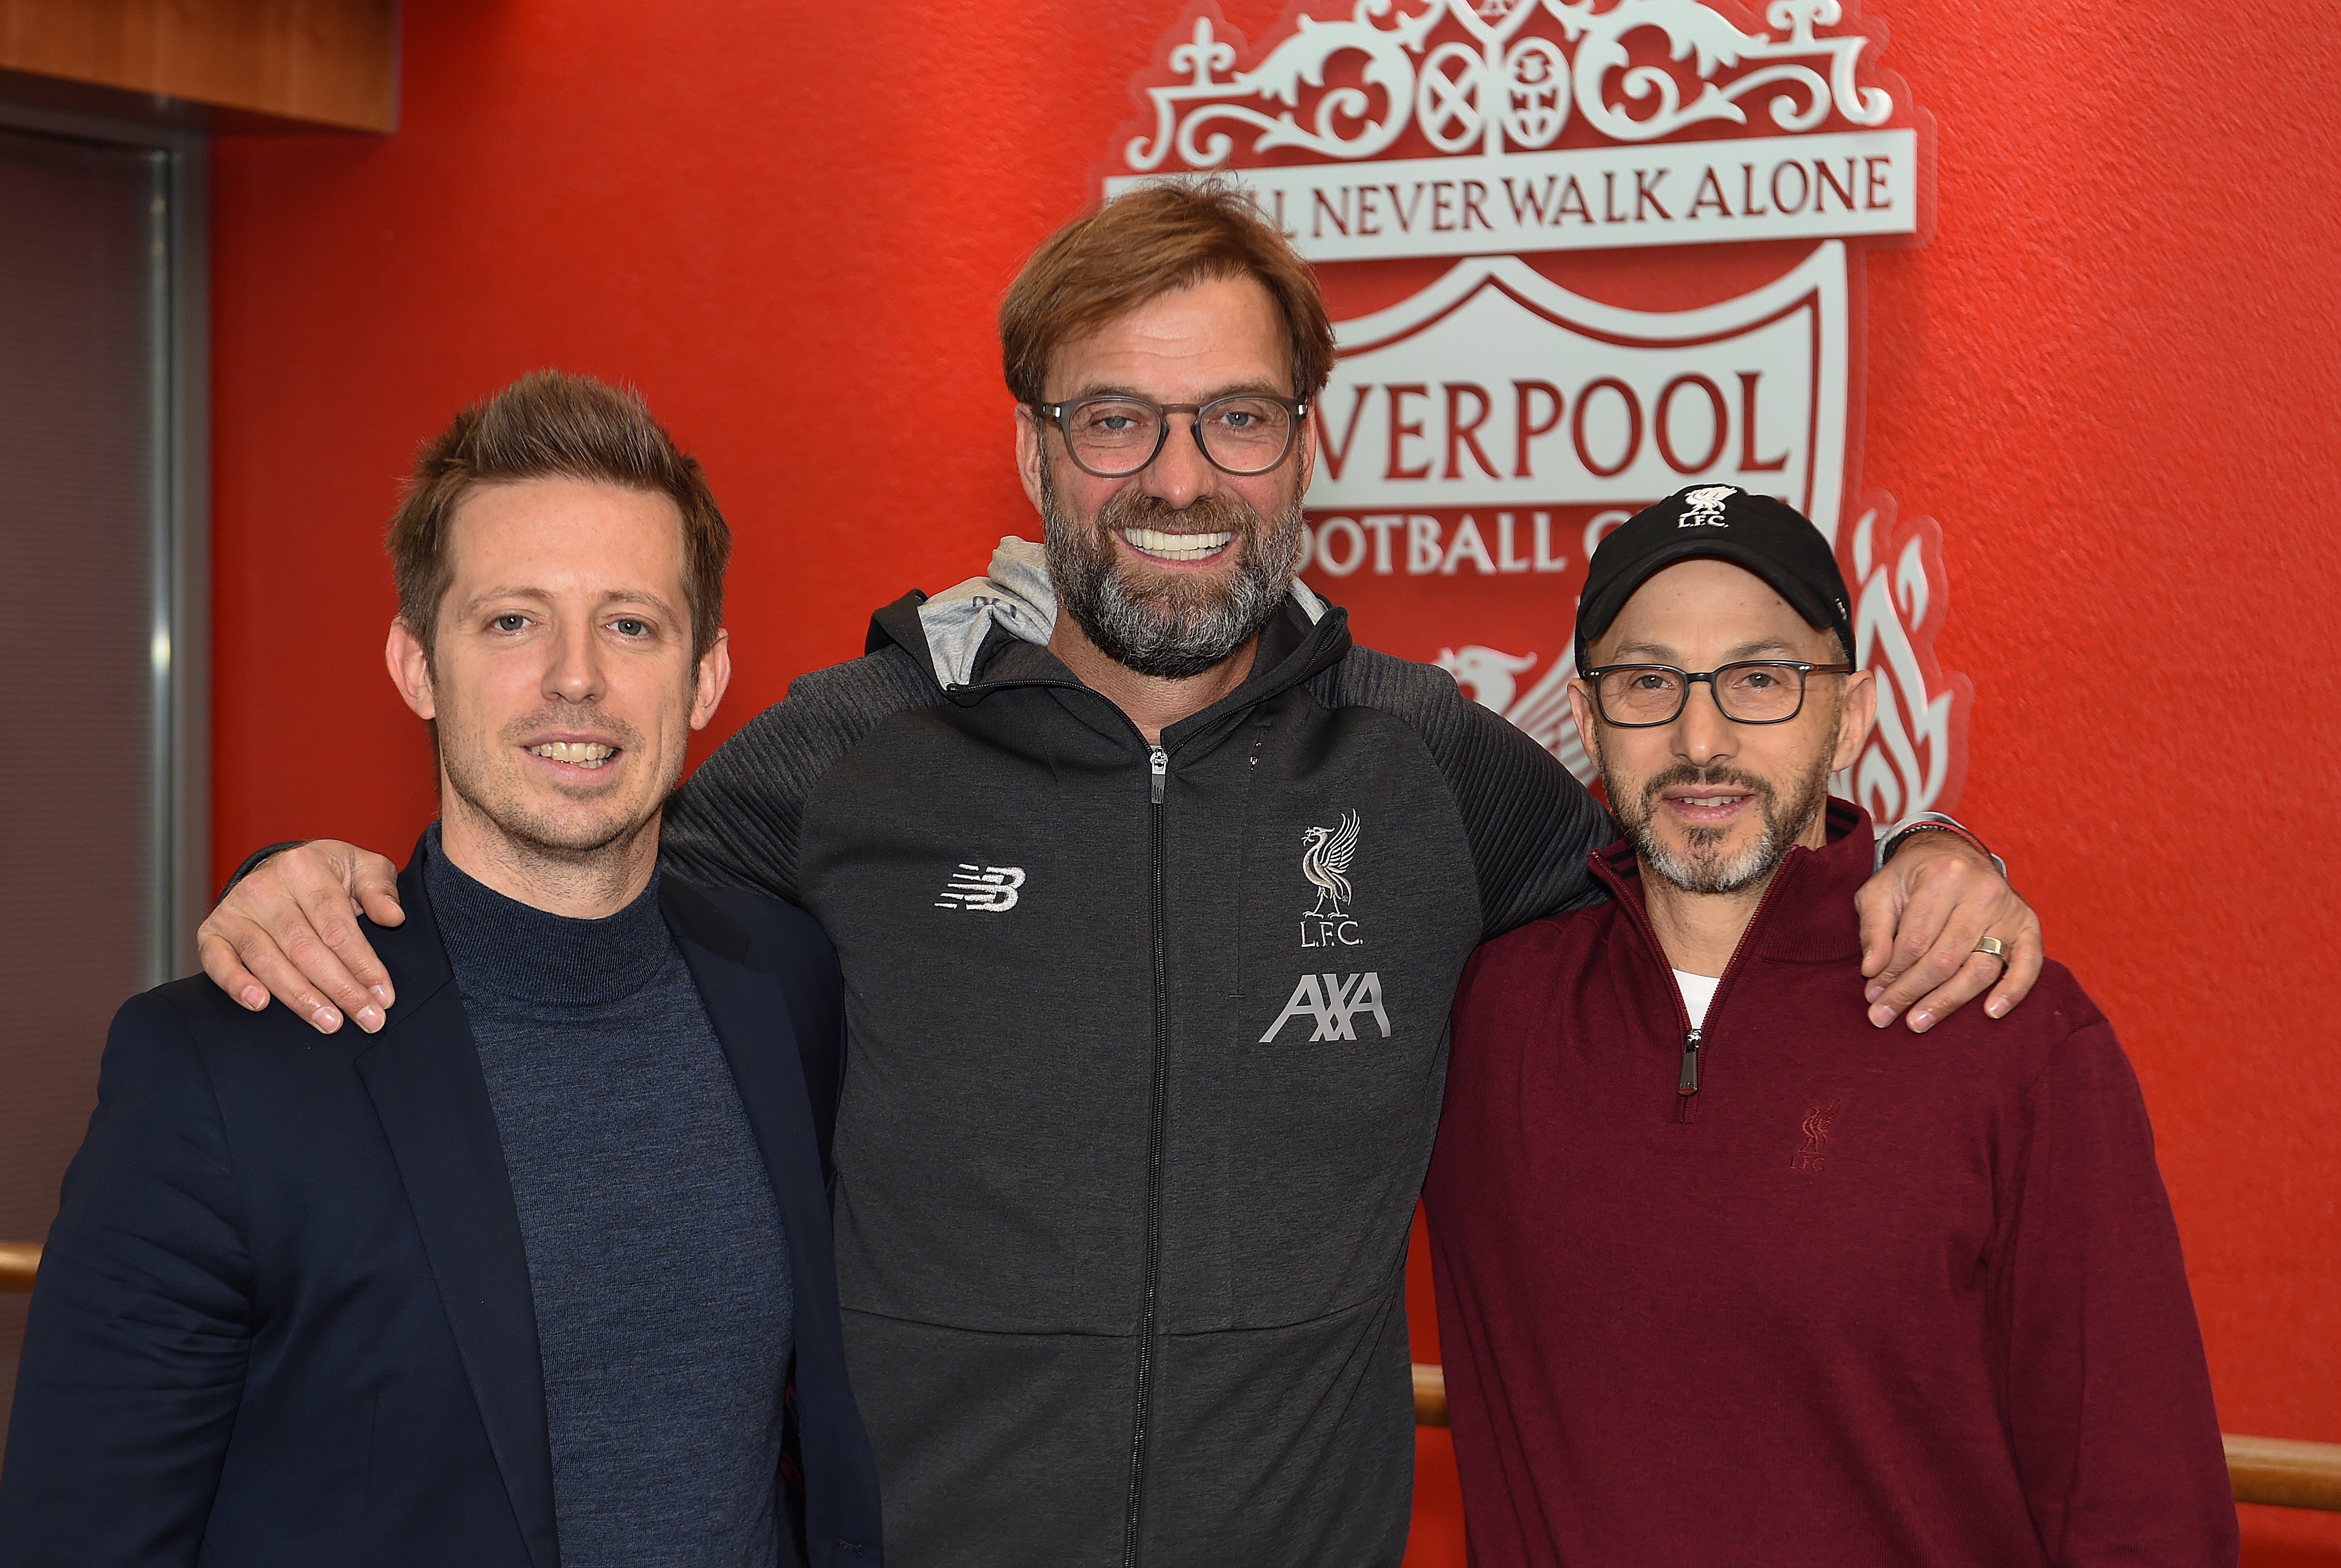 Michael Edwards, left, with Jurgen Klopp and Mike Gordon after the German’s contract extension in 2019